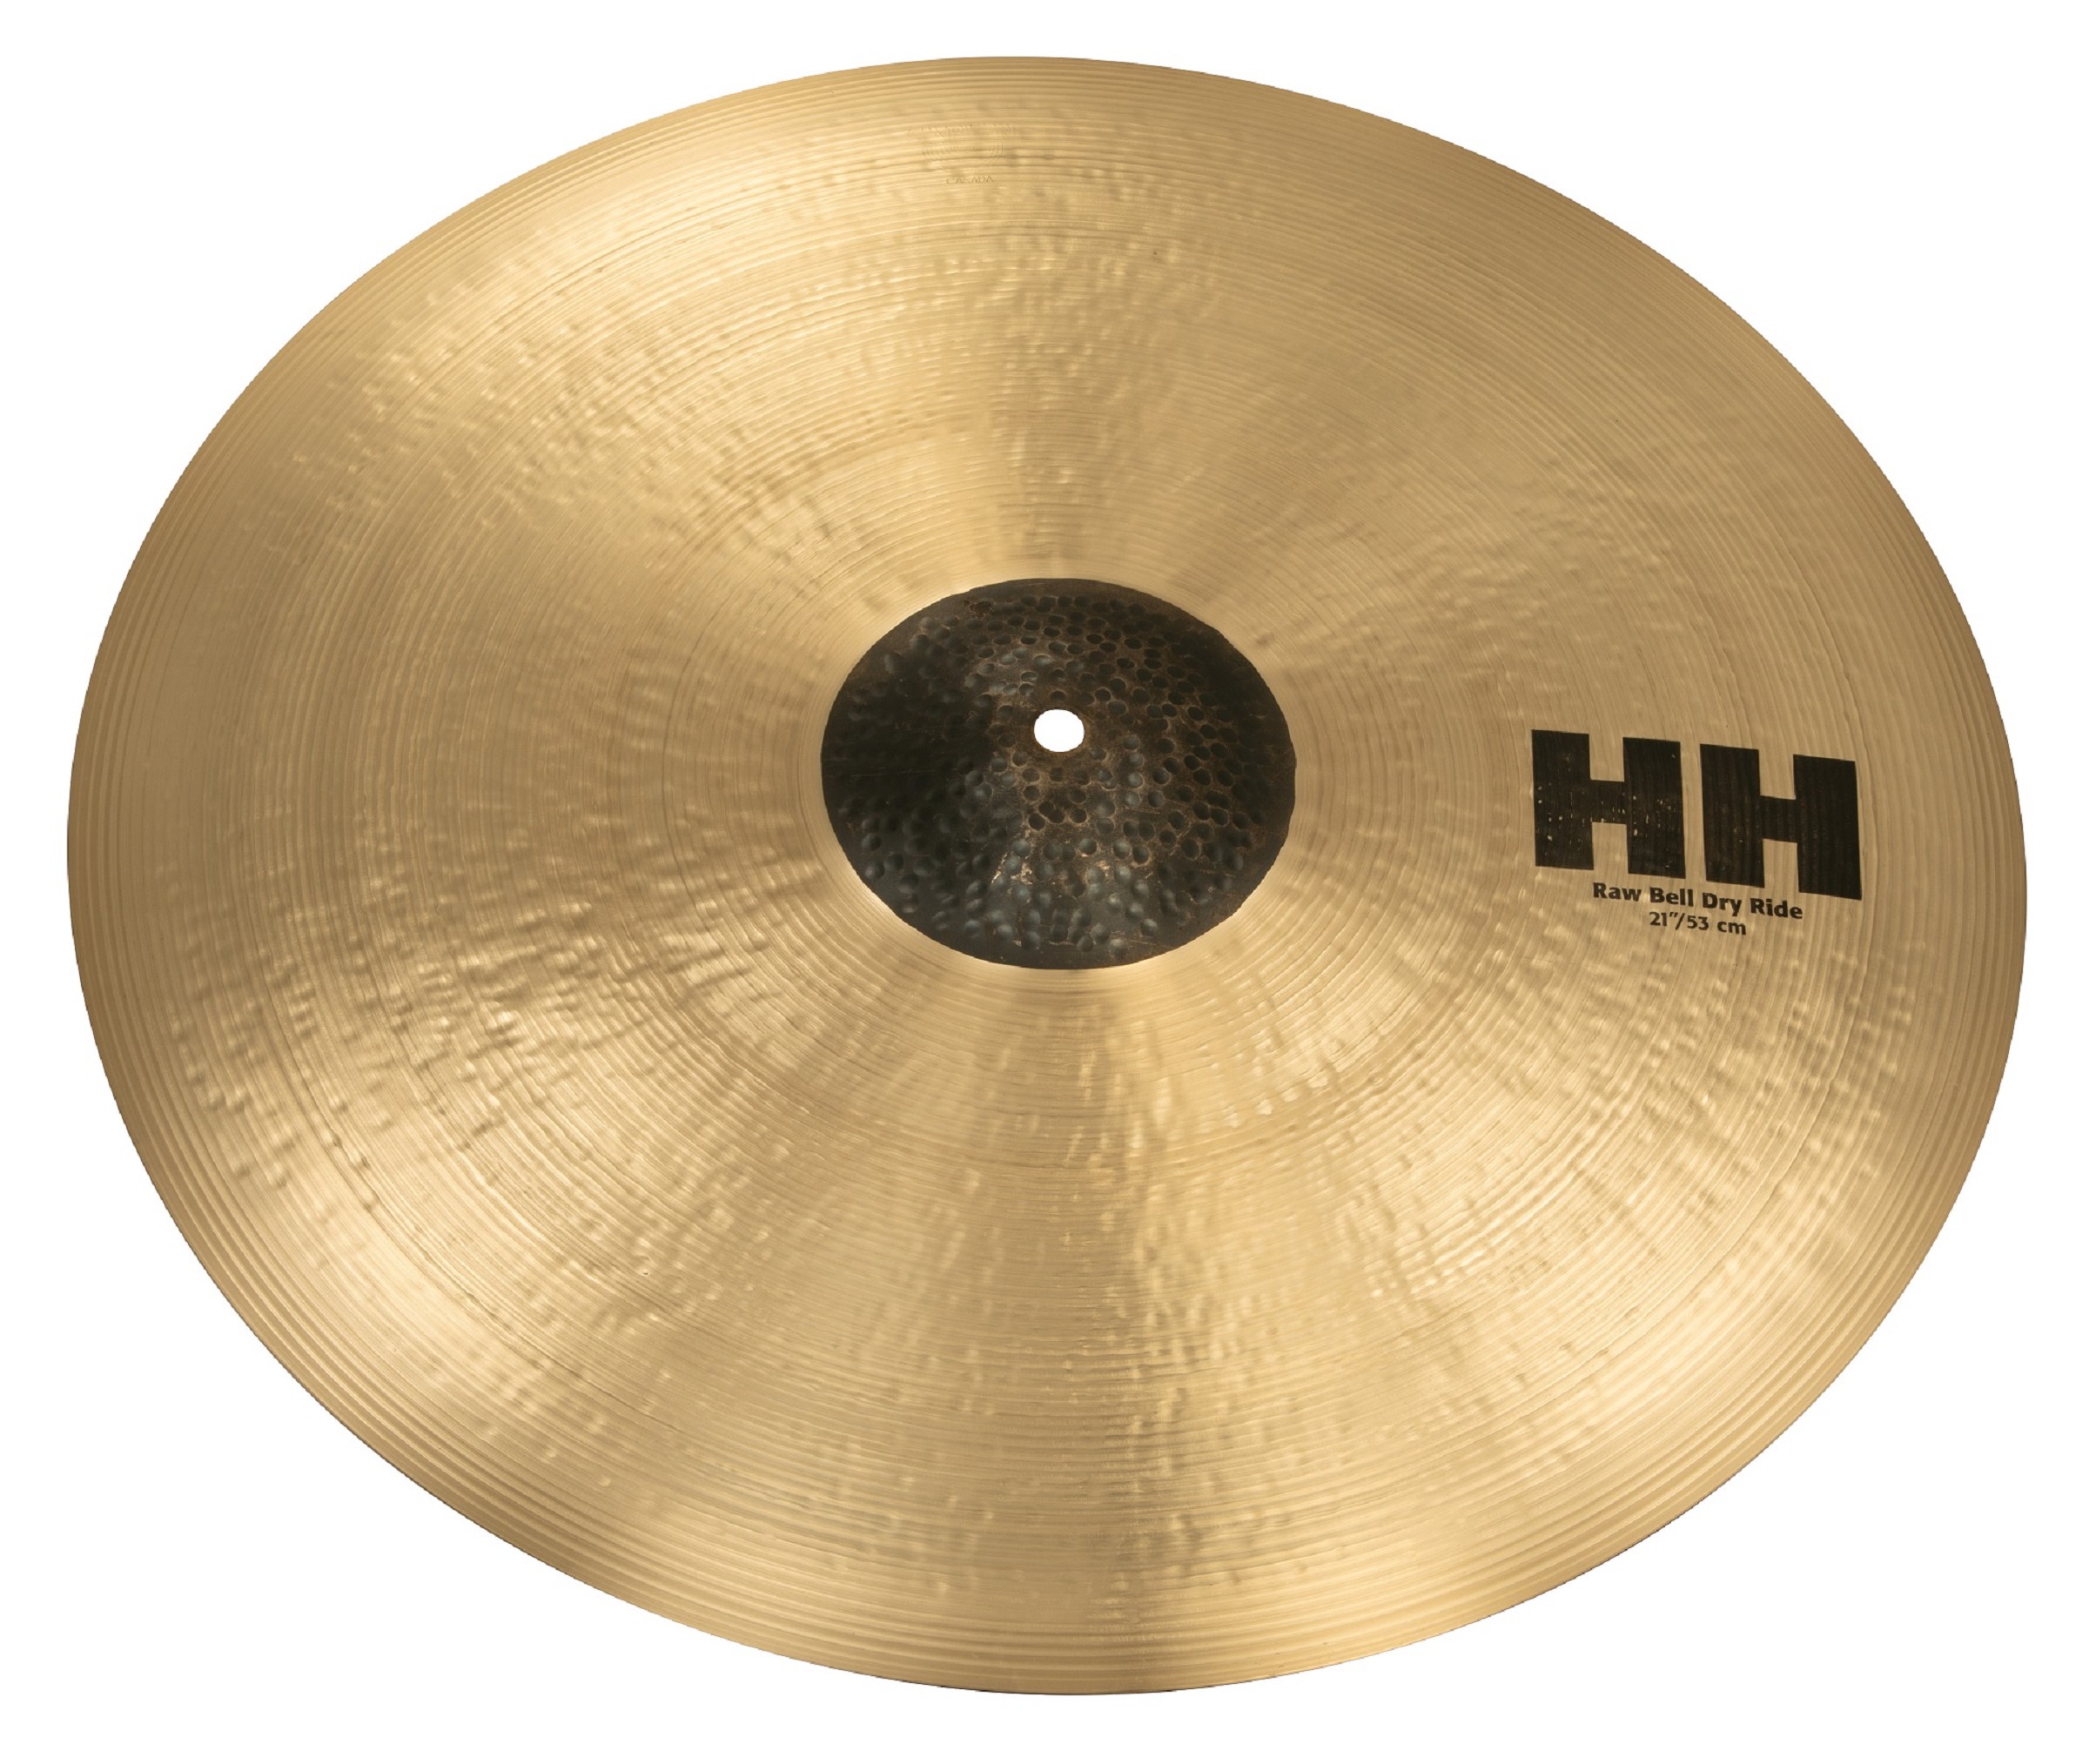 Sabian HH 21" Raw Bell Dry Ride